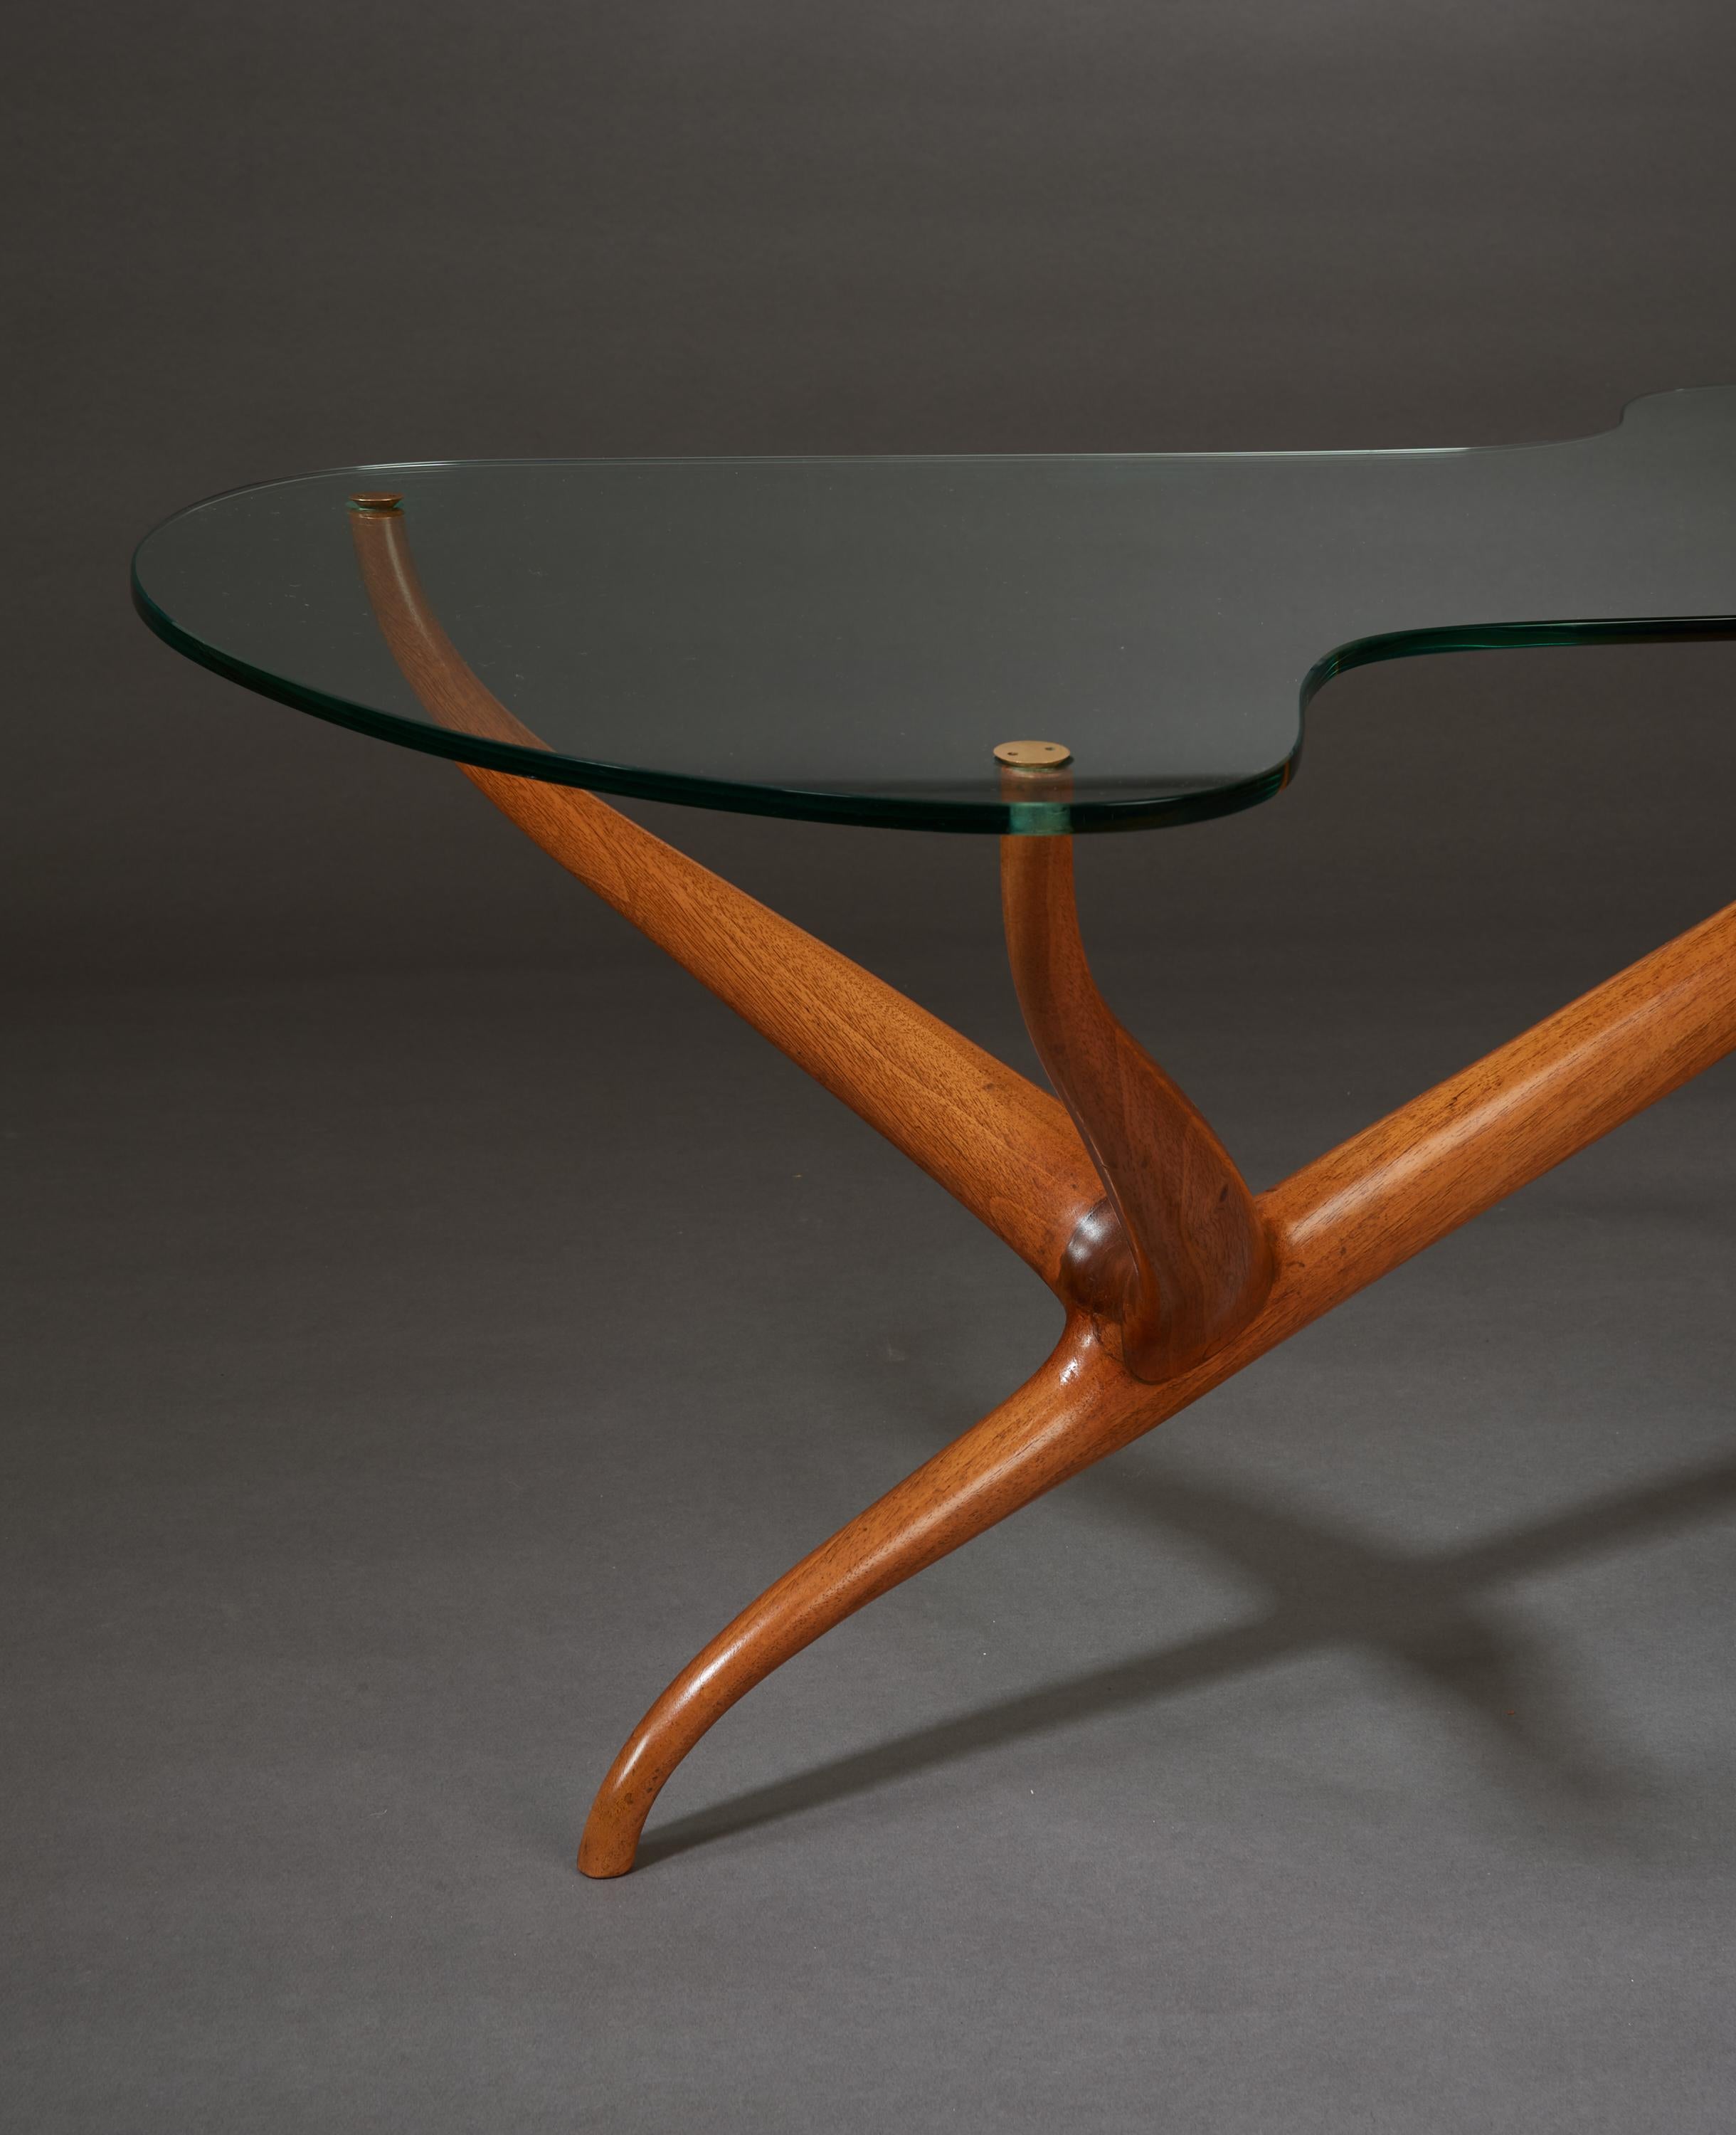 Pierluigi Giordani: Exceptional Sculptural Oak & Glass Coffee Table, Italy 1950s For Sale 2